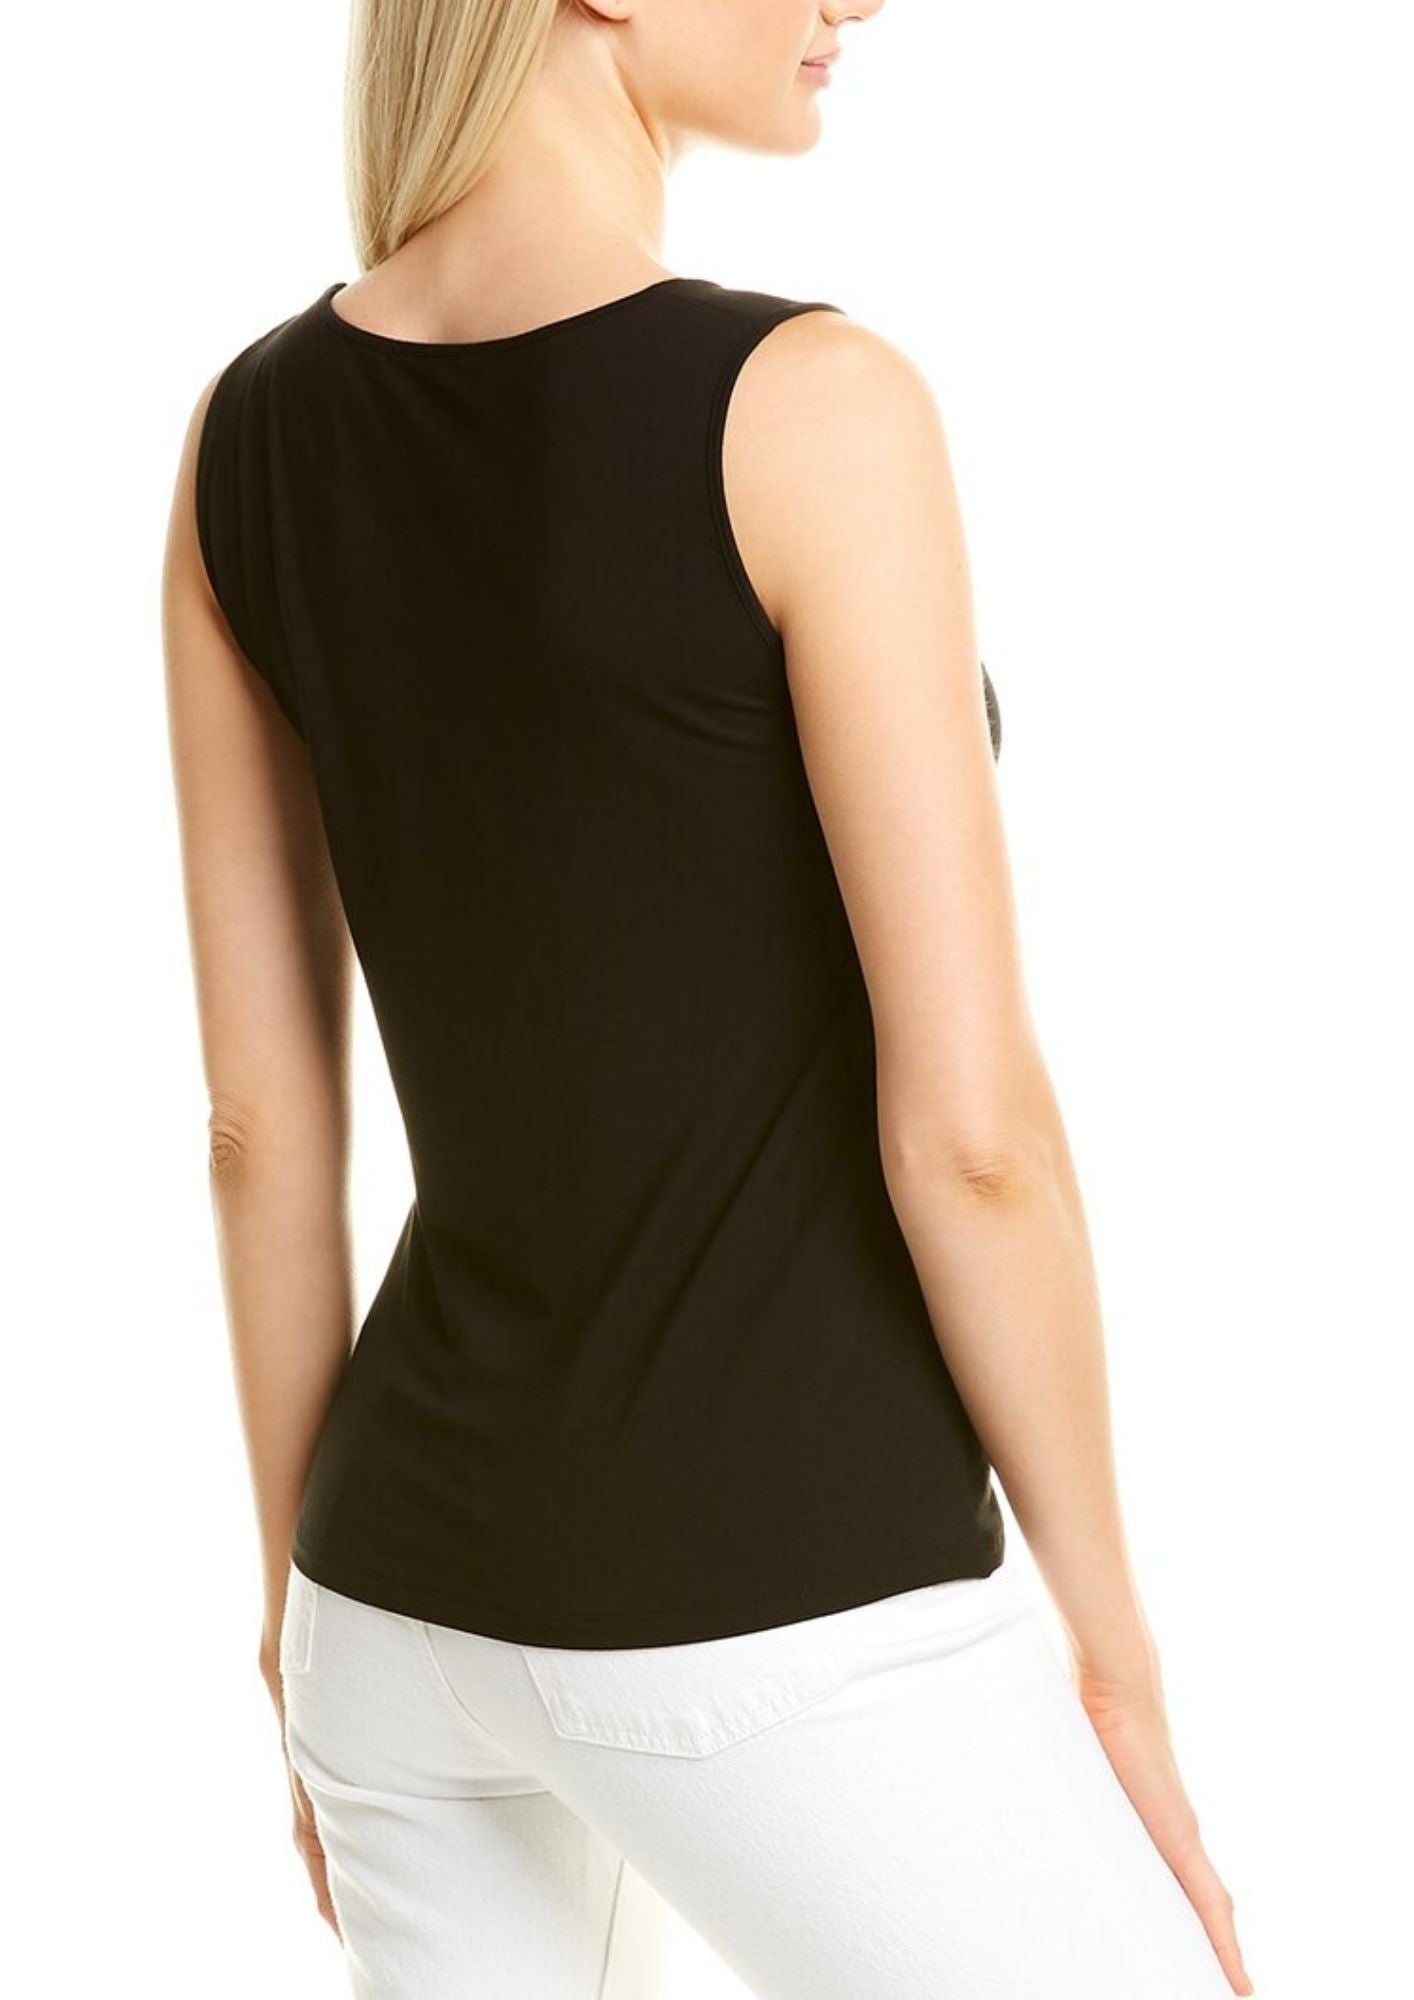 Black Cut Out at Shoulder Sleeveless Top